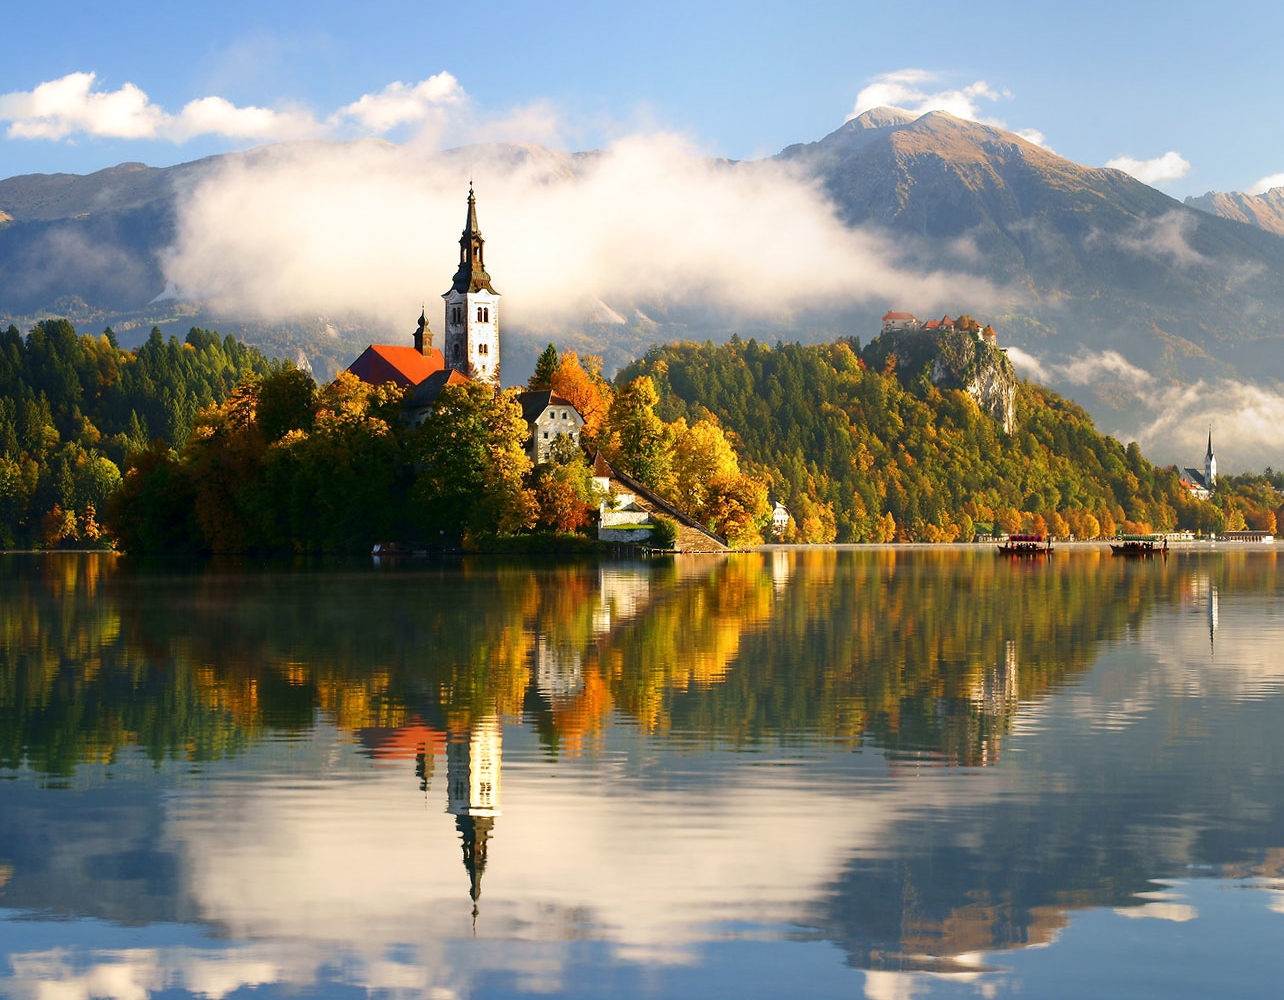 Lake bled guided tour